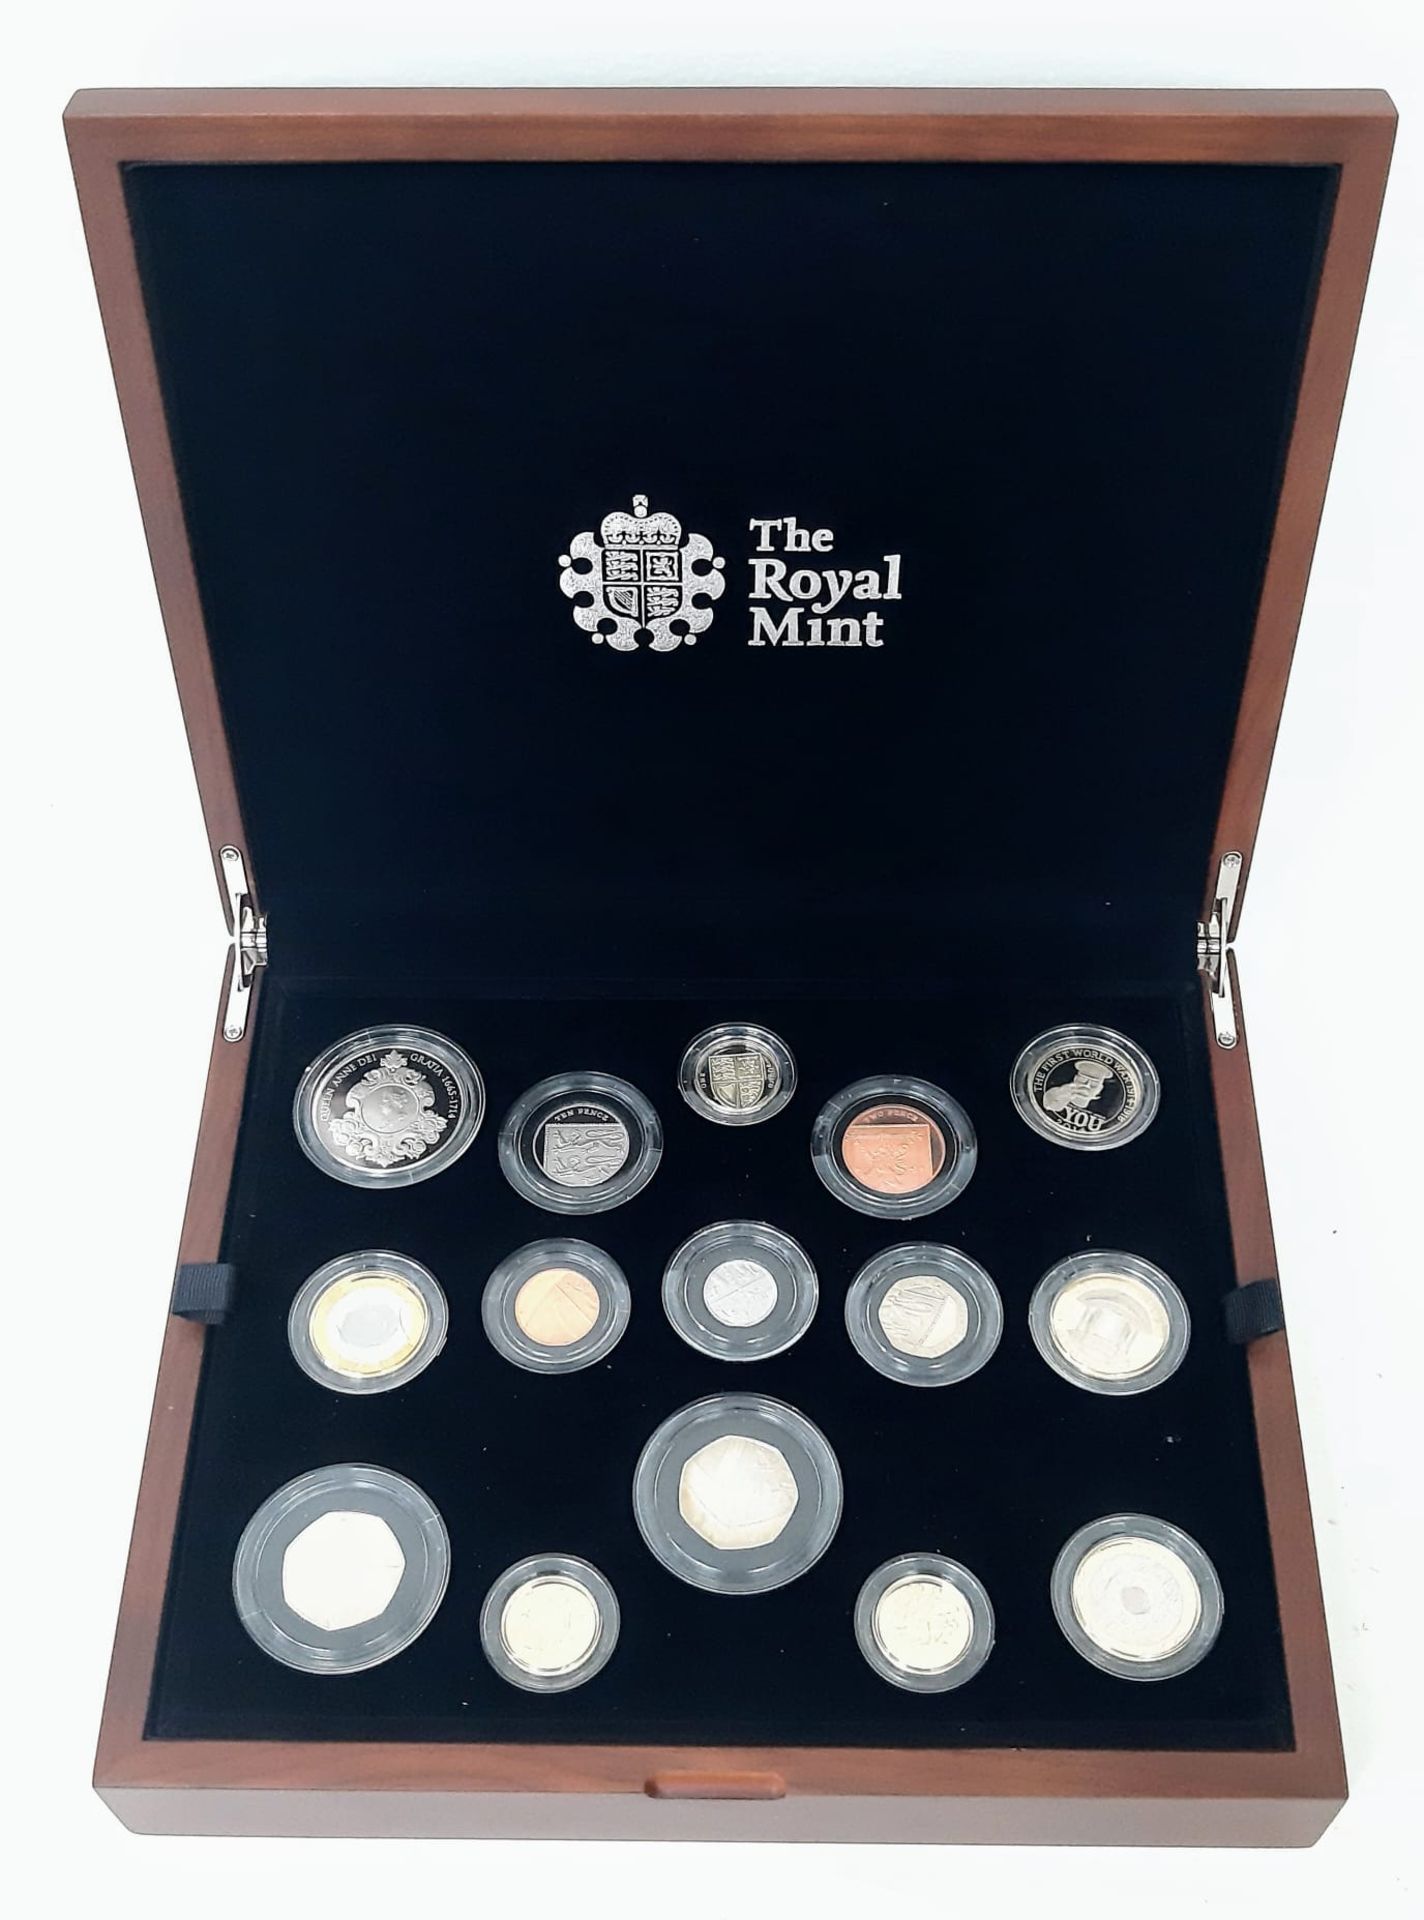 The Royal Mint 2014 United Kingdom Premium Proof 15 Coin Set. Slight marks on exterior box but the - Image 8 of 8